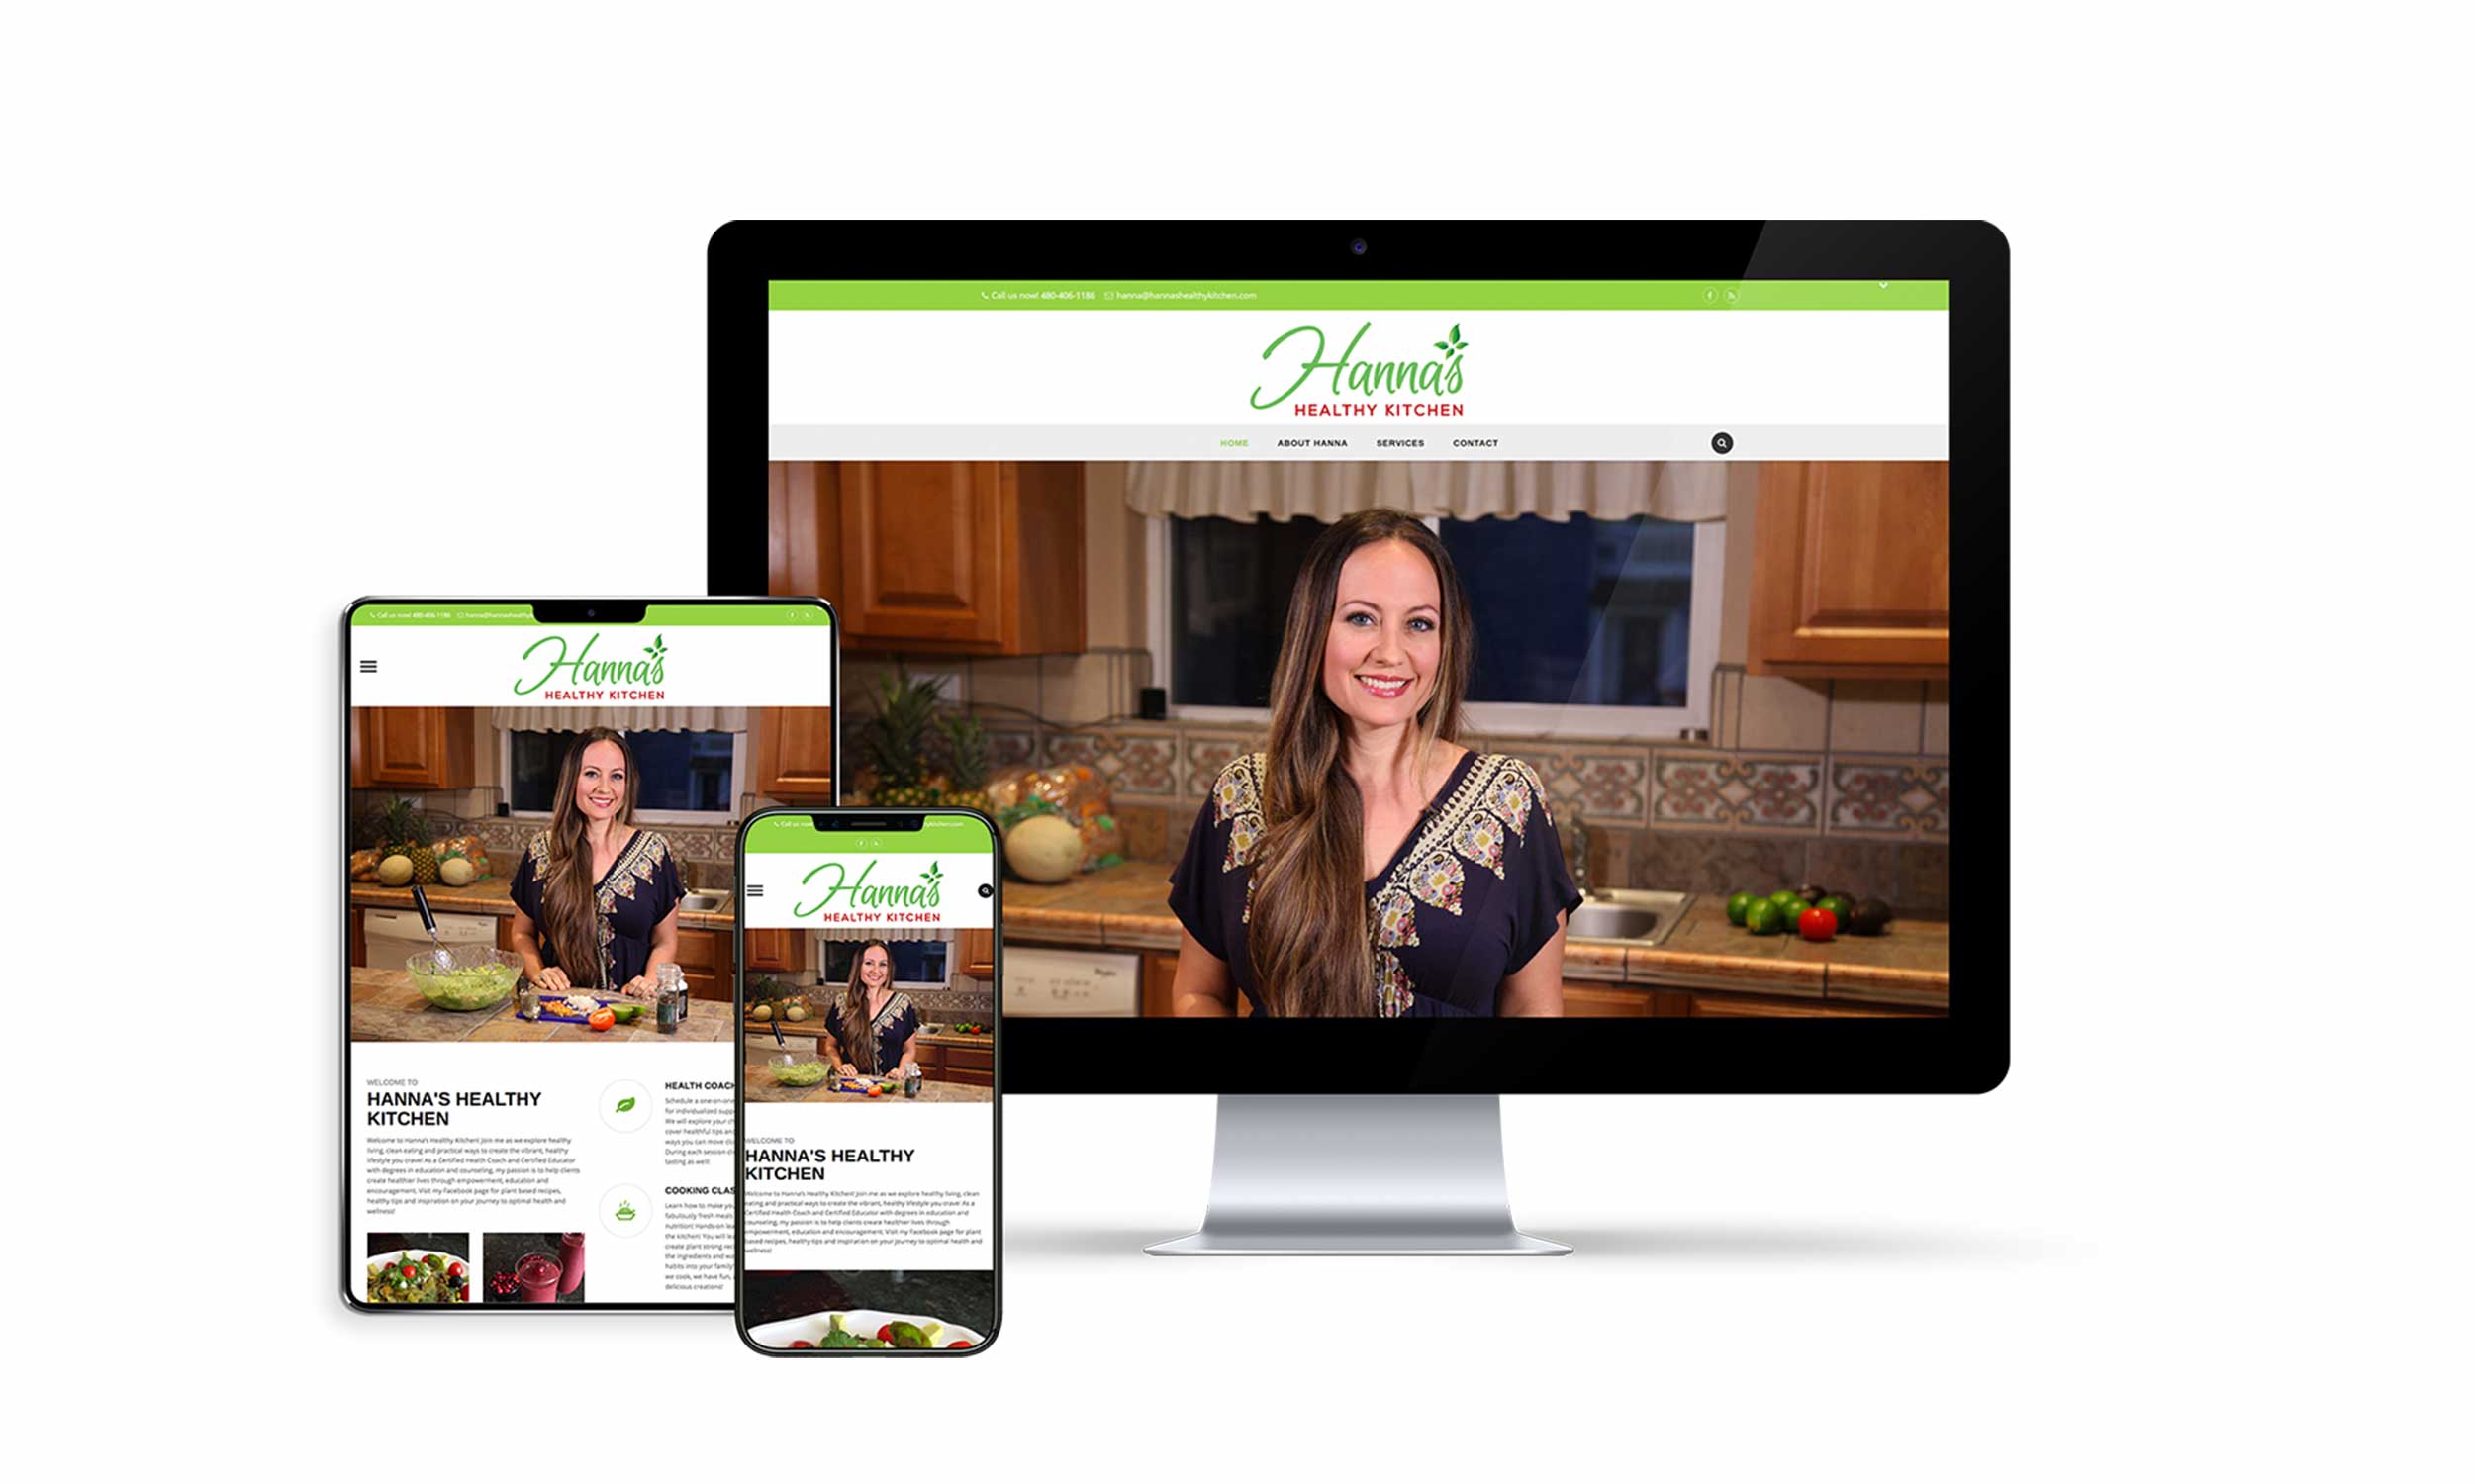 Hannas Healthy Kitchen Web Design for cooking show.